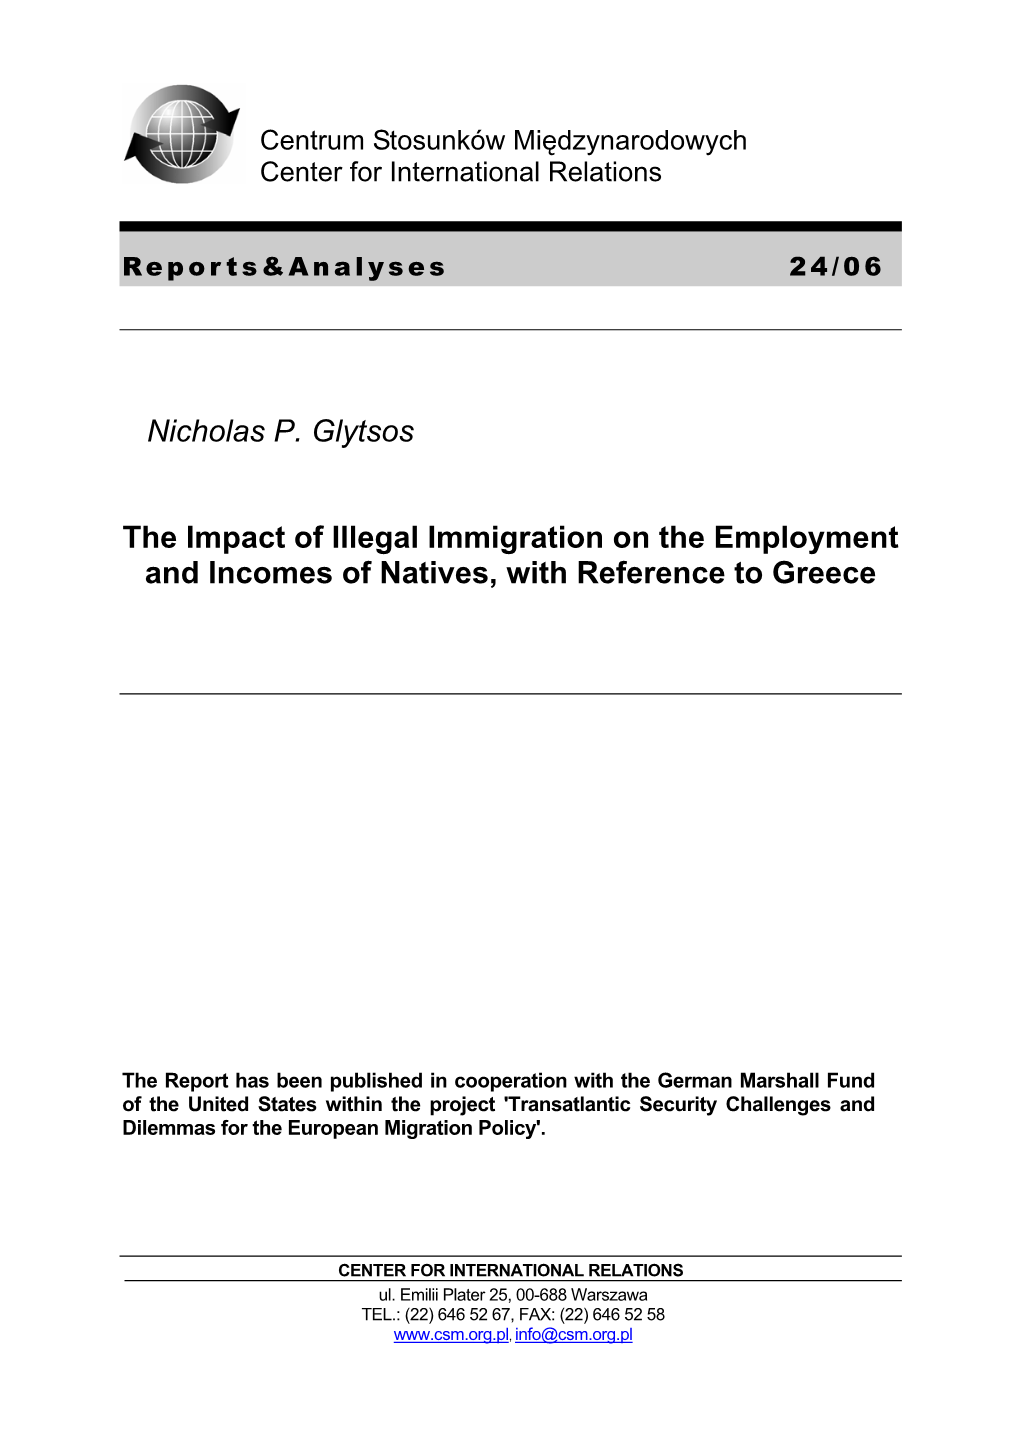 Nicholas P. Glytsos the Impact of Illegal Immigration on The